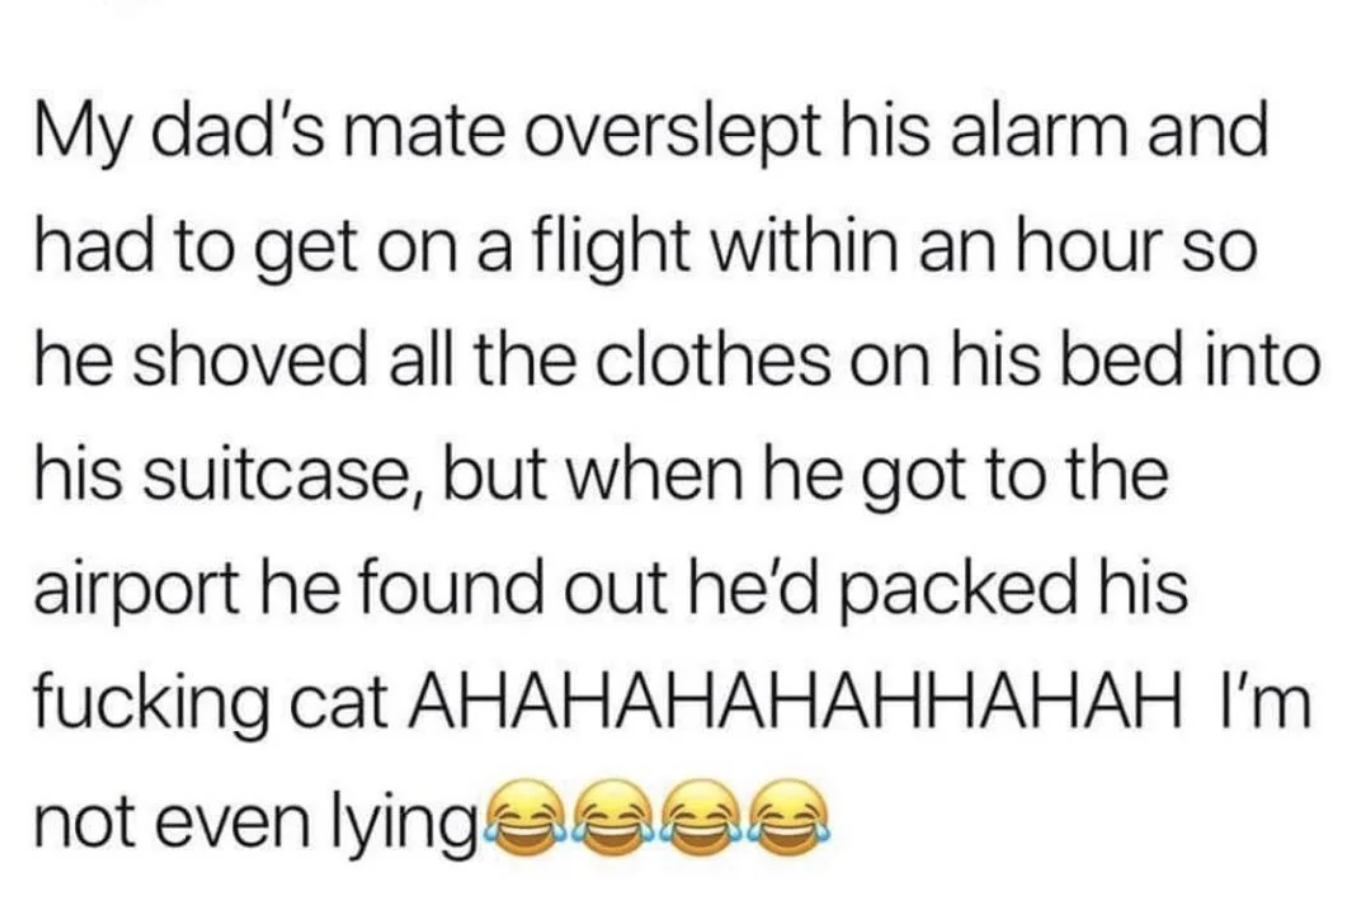 Their dad&#x27;s friend overslept for a flight, so he shoved all the clothes on his bed into his suitcase, but when he got to the airport, he found out he&#x27;d packed his cat — &quot;I&#x27;m not even lying&quot;